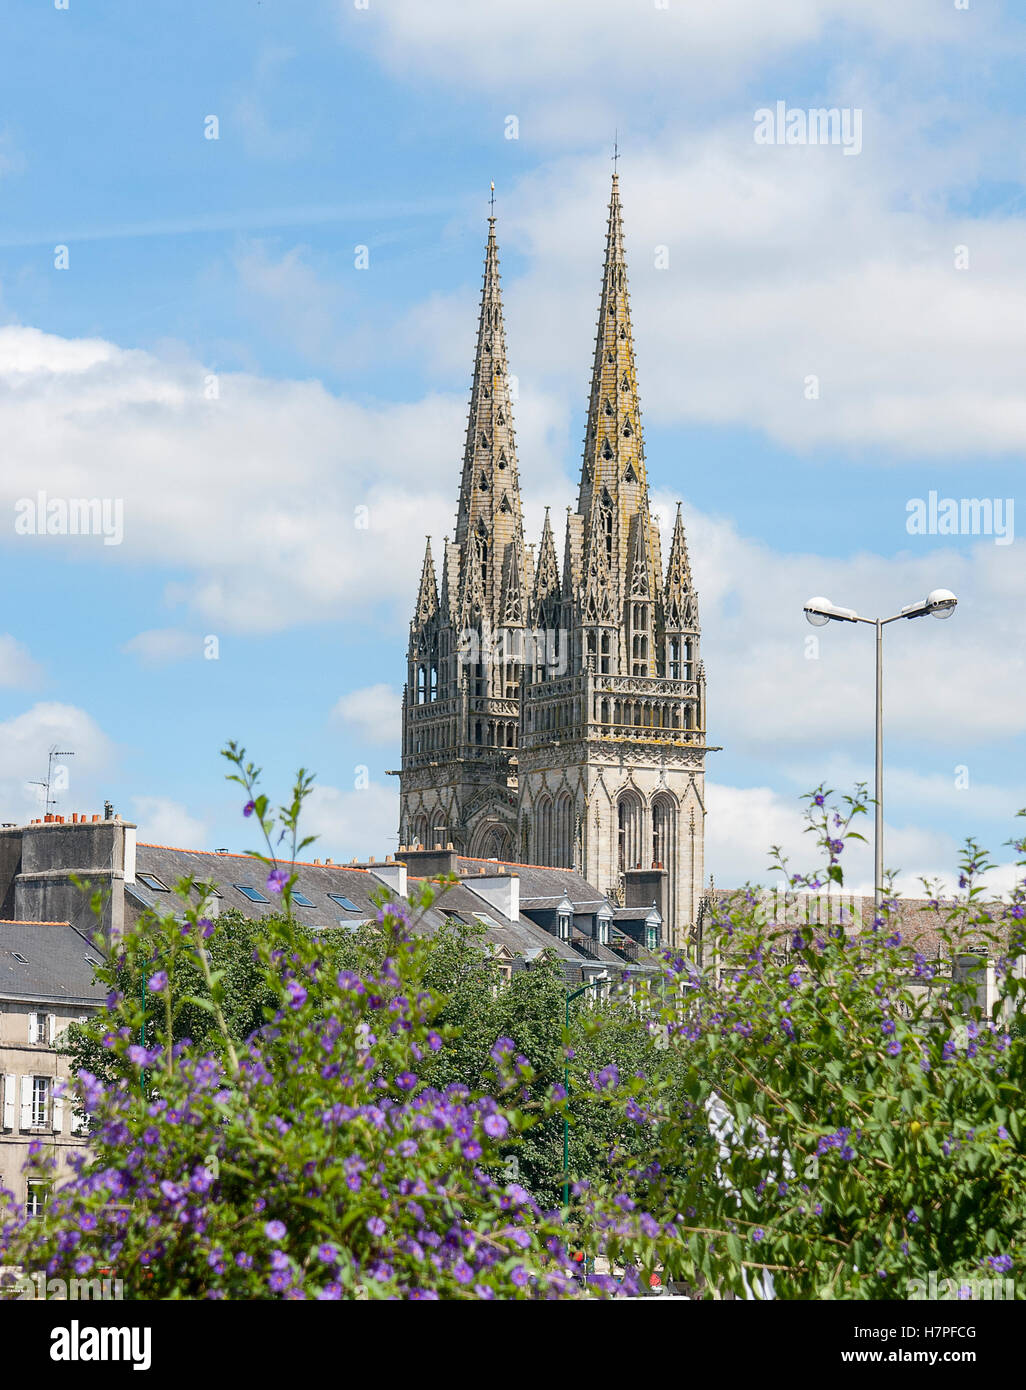 Scenery at Quimper, a commune and capital of the Finistere department of Brittany in northwestern France. Stock Photo